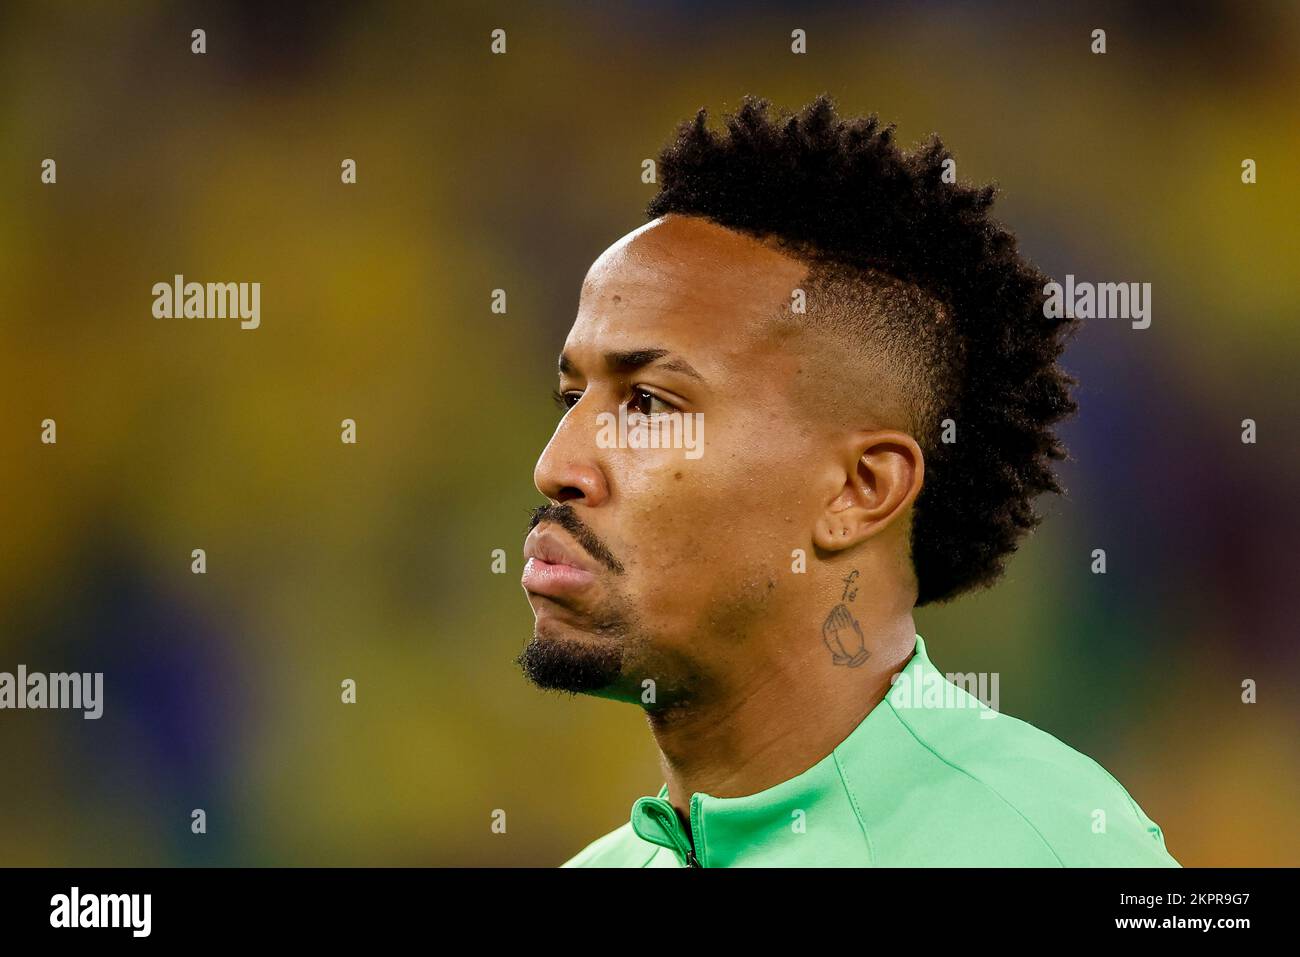 Doha, Qatar. 28th Nov, 2022. Eder MIlitão do Brasil during a match between Brazil and Switzerland, valid for the group stage of the World Cup, held at Estádio 974 in Doha, Qatar. Credit: Marcelo Machado de Melo/FotoArena/Alamy Live News Stock Photo